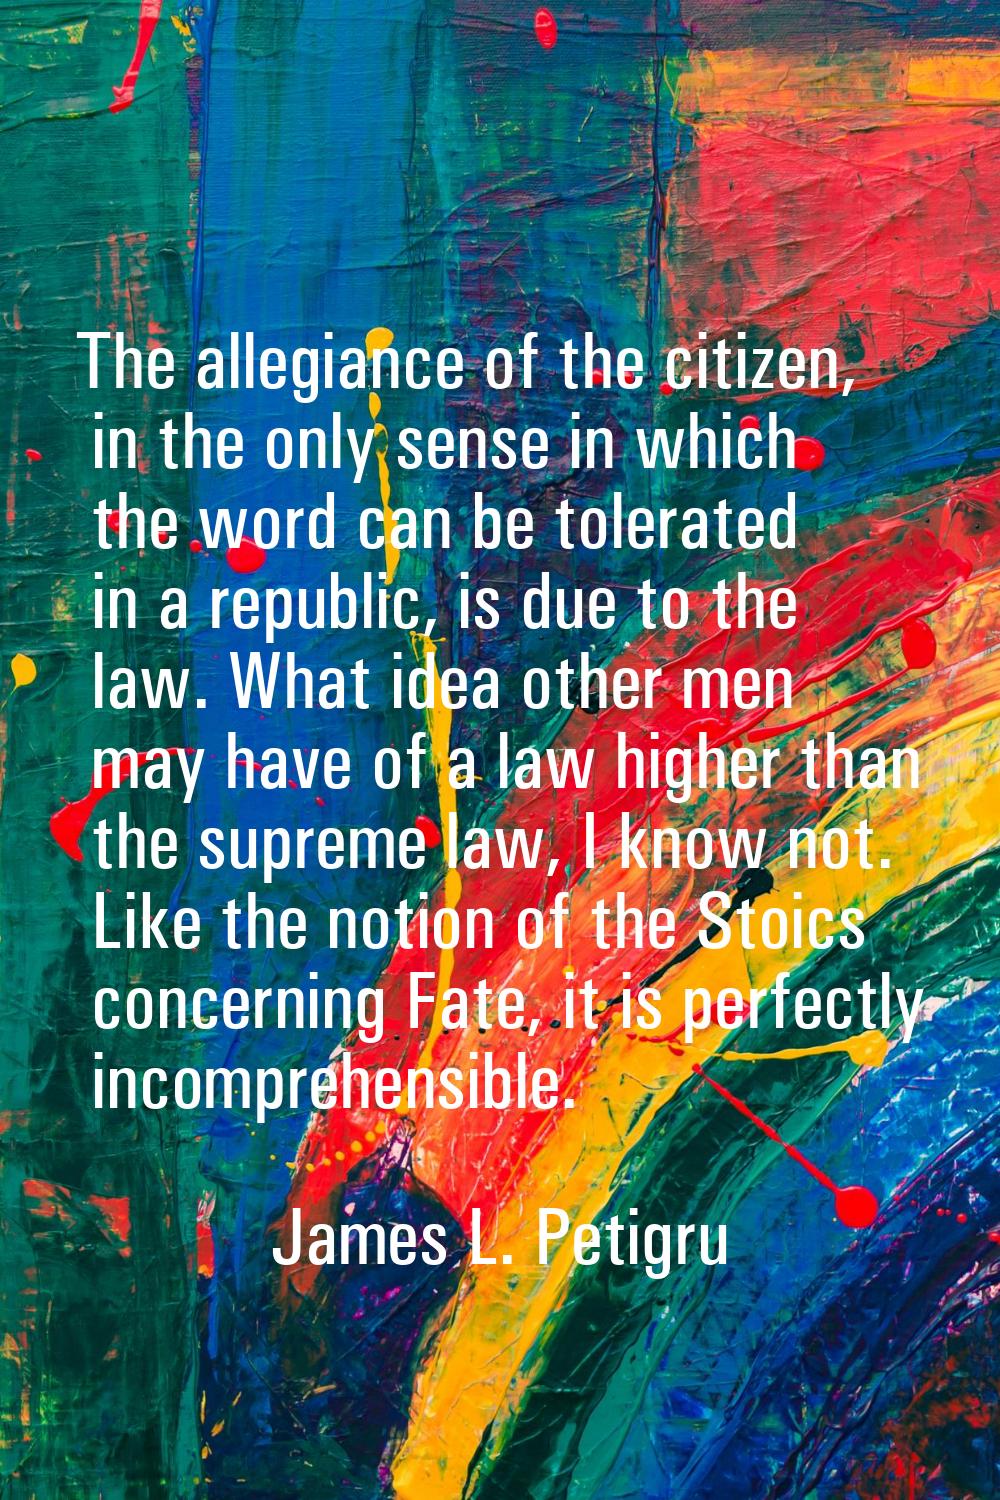 The allegiance of the citizen, in the only sense in which the word can be tolerated in a republic, 